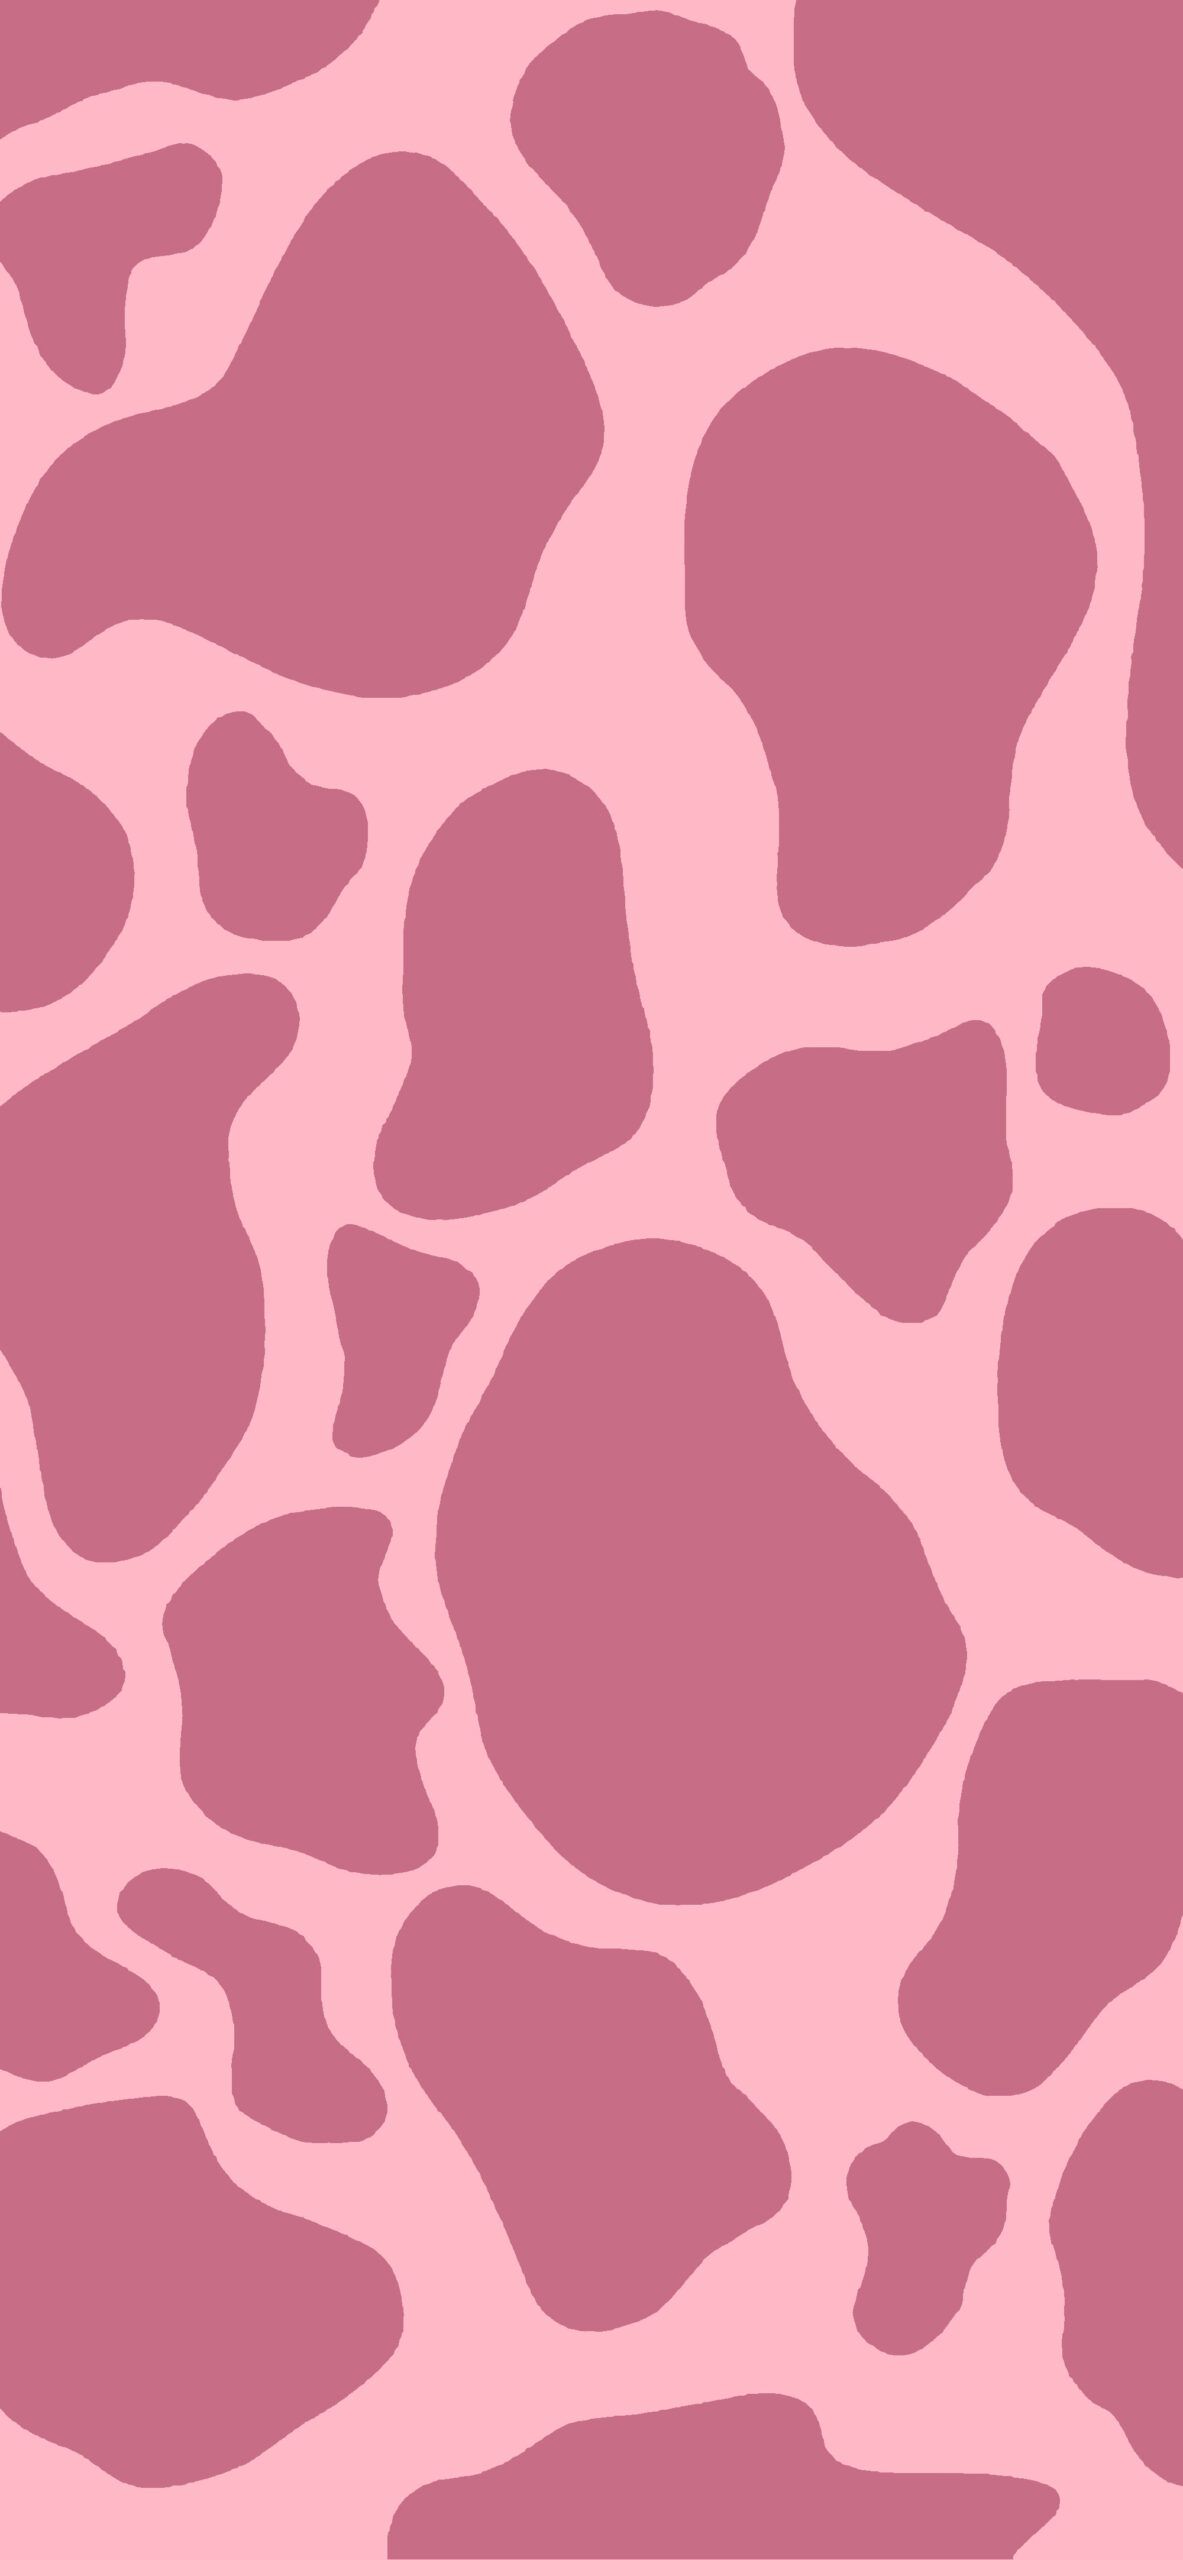 A pink cow print pattern on a light pink background - Cow, colorful, pattern